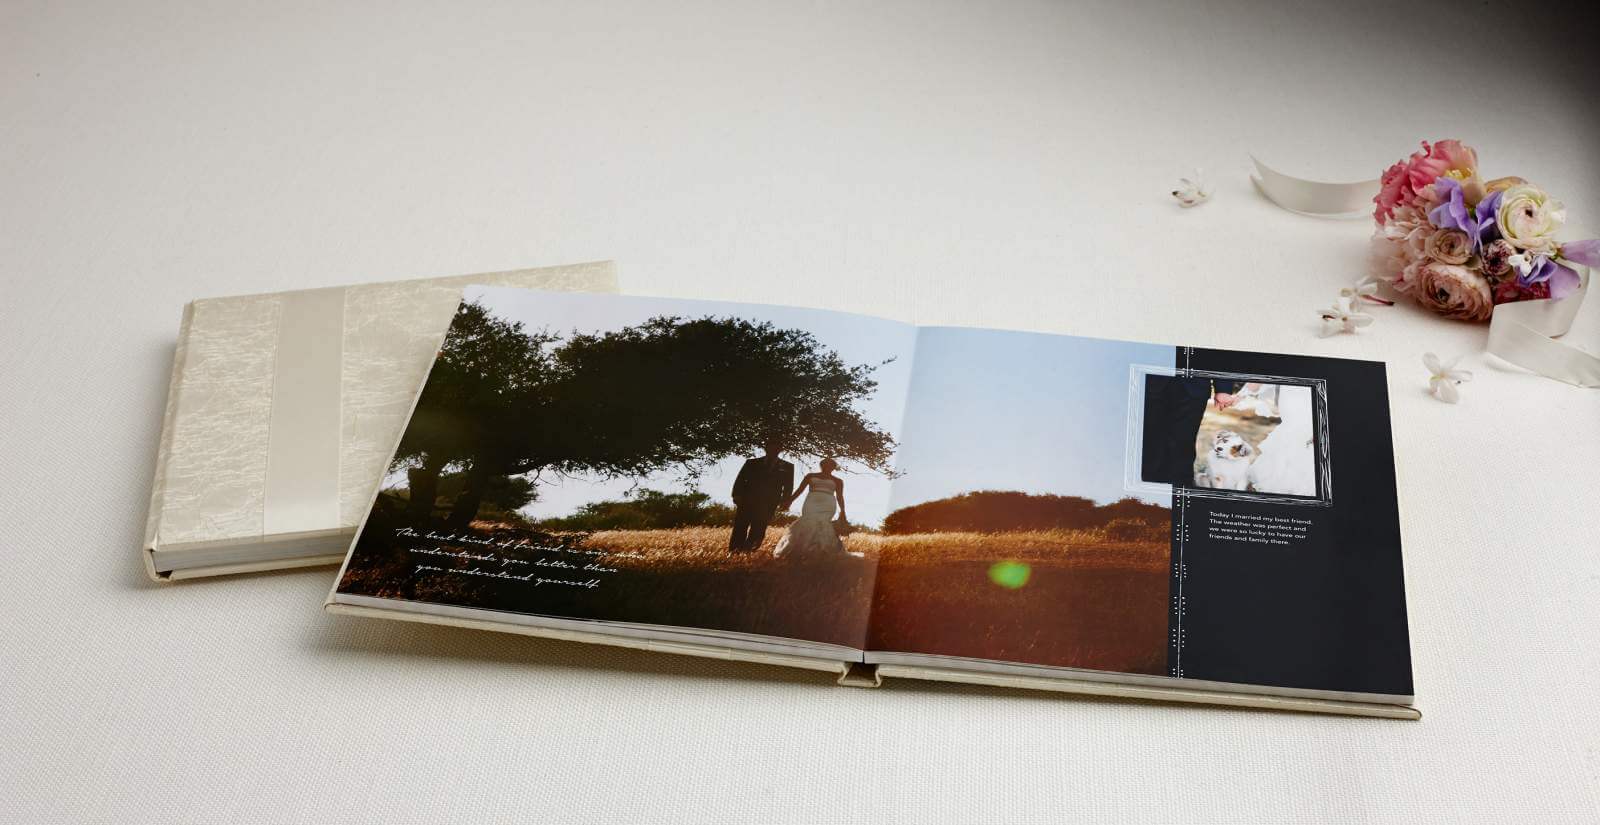 A rustic-style wedding photo book.